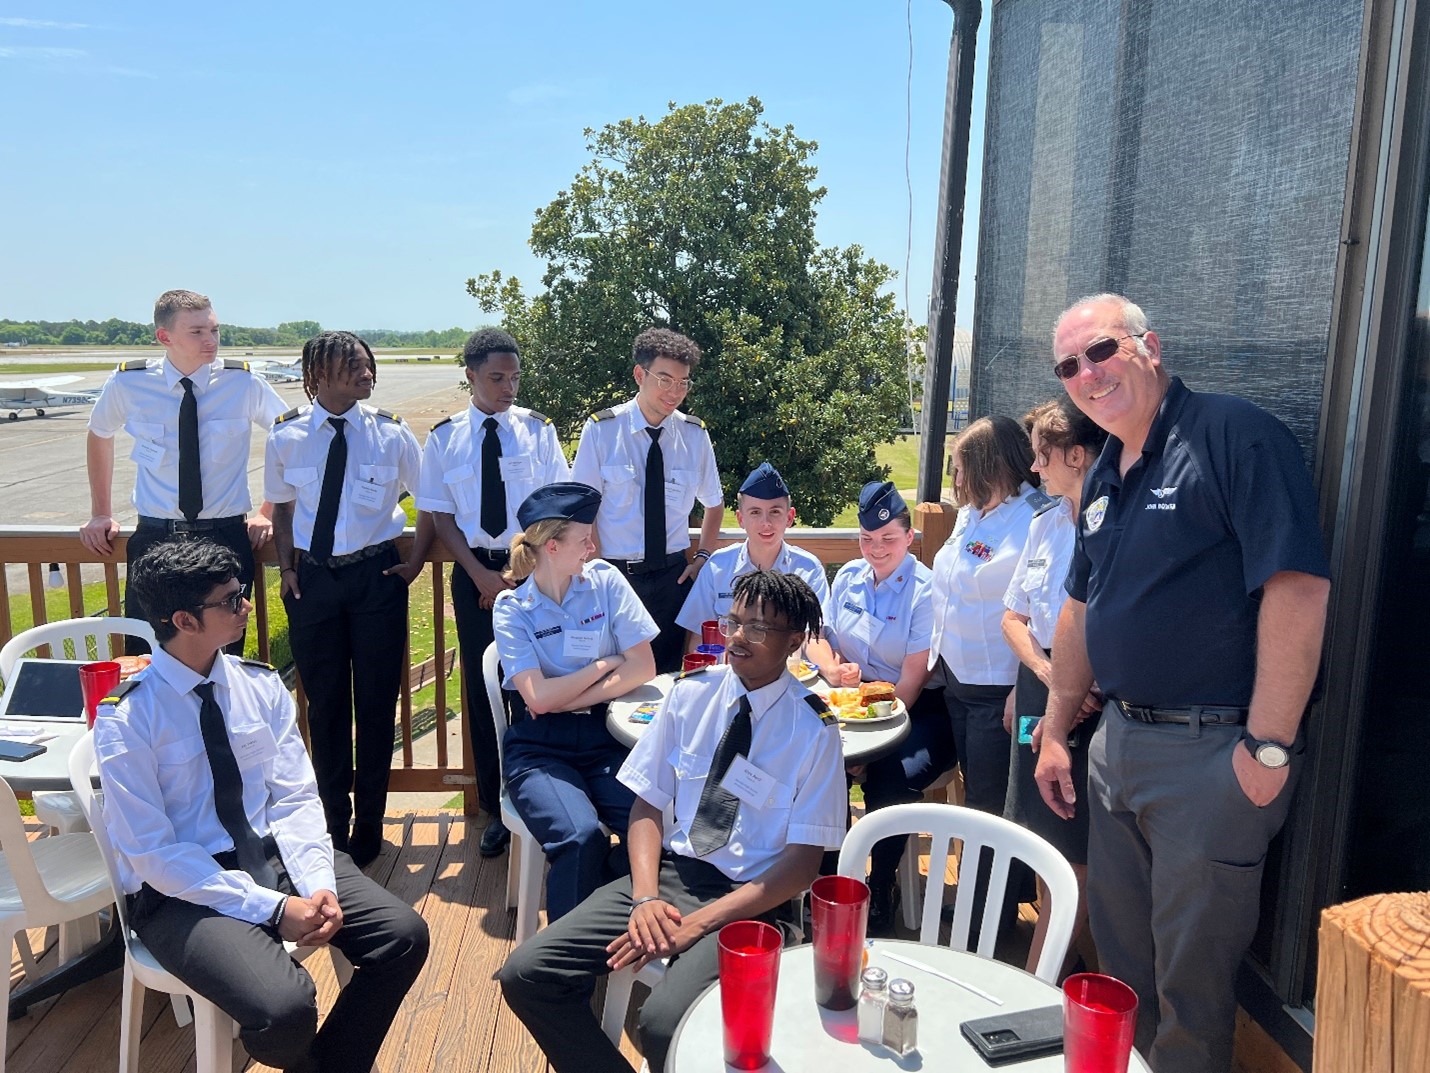 High School students sitting in uniform outside at the Downwind Restaurant